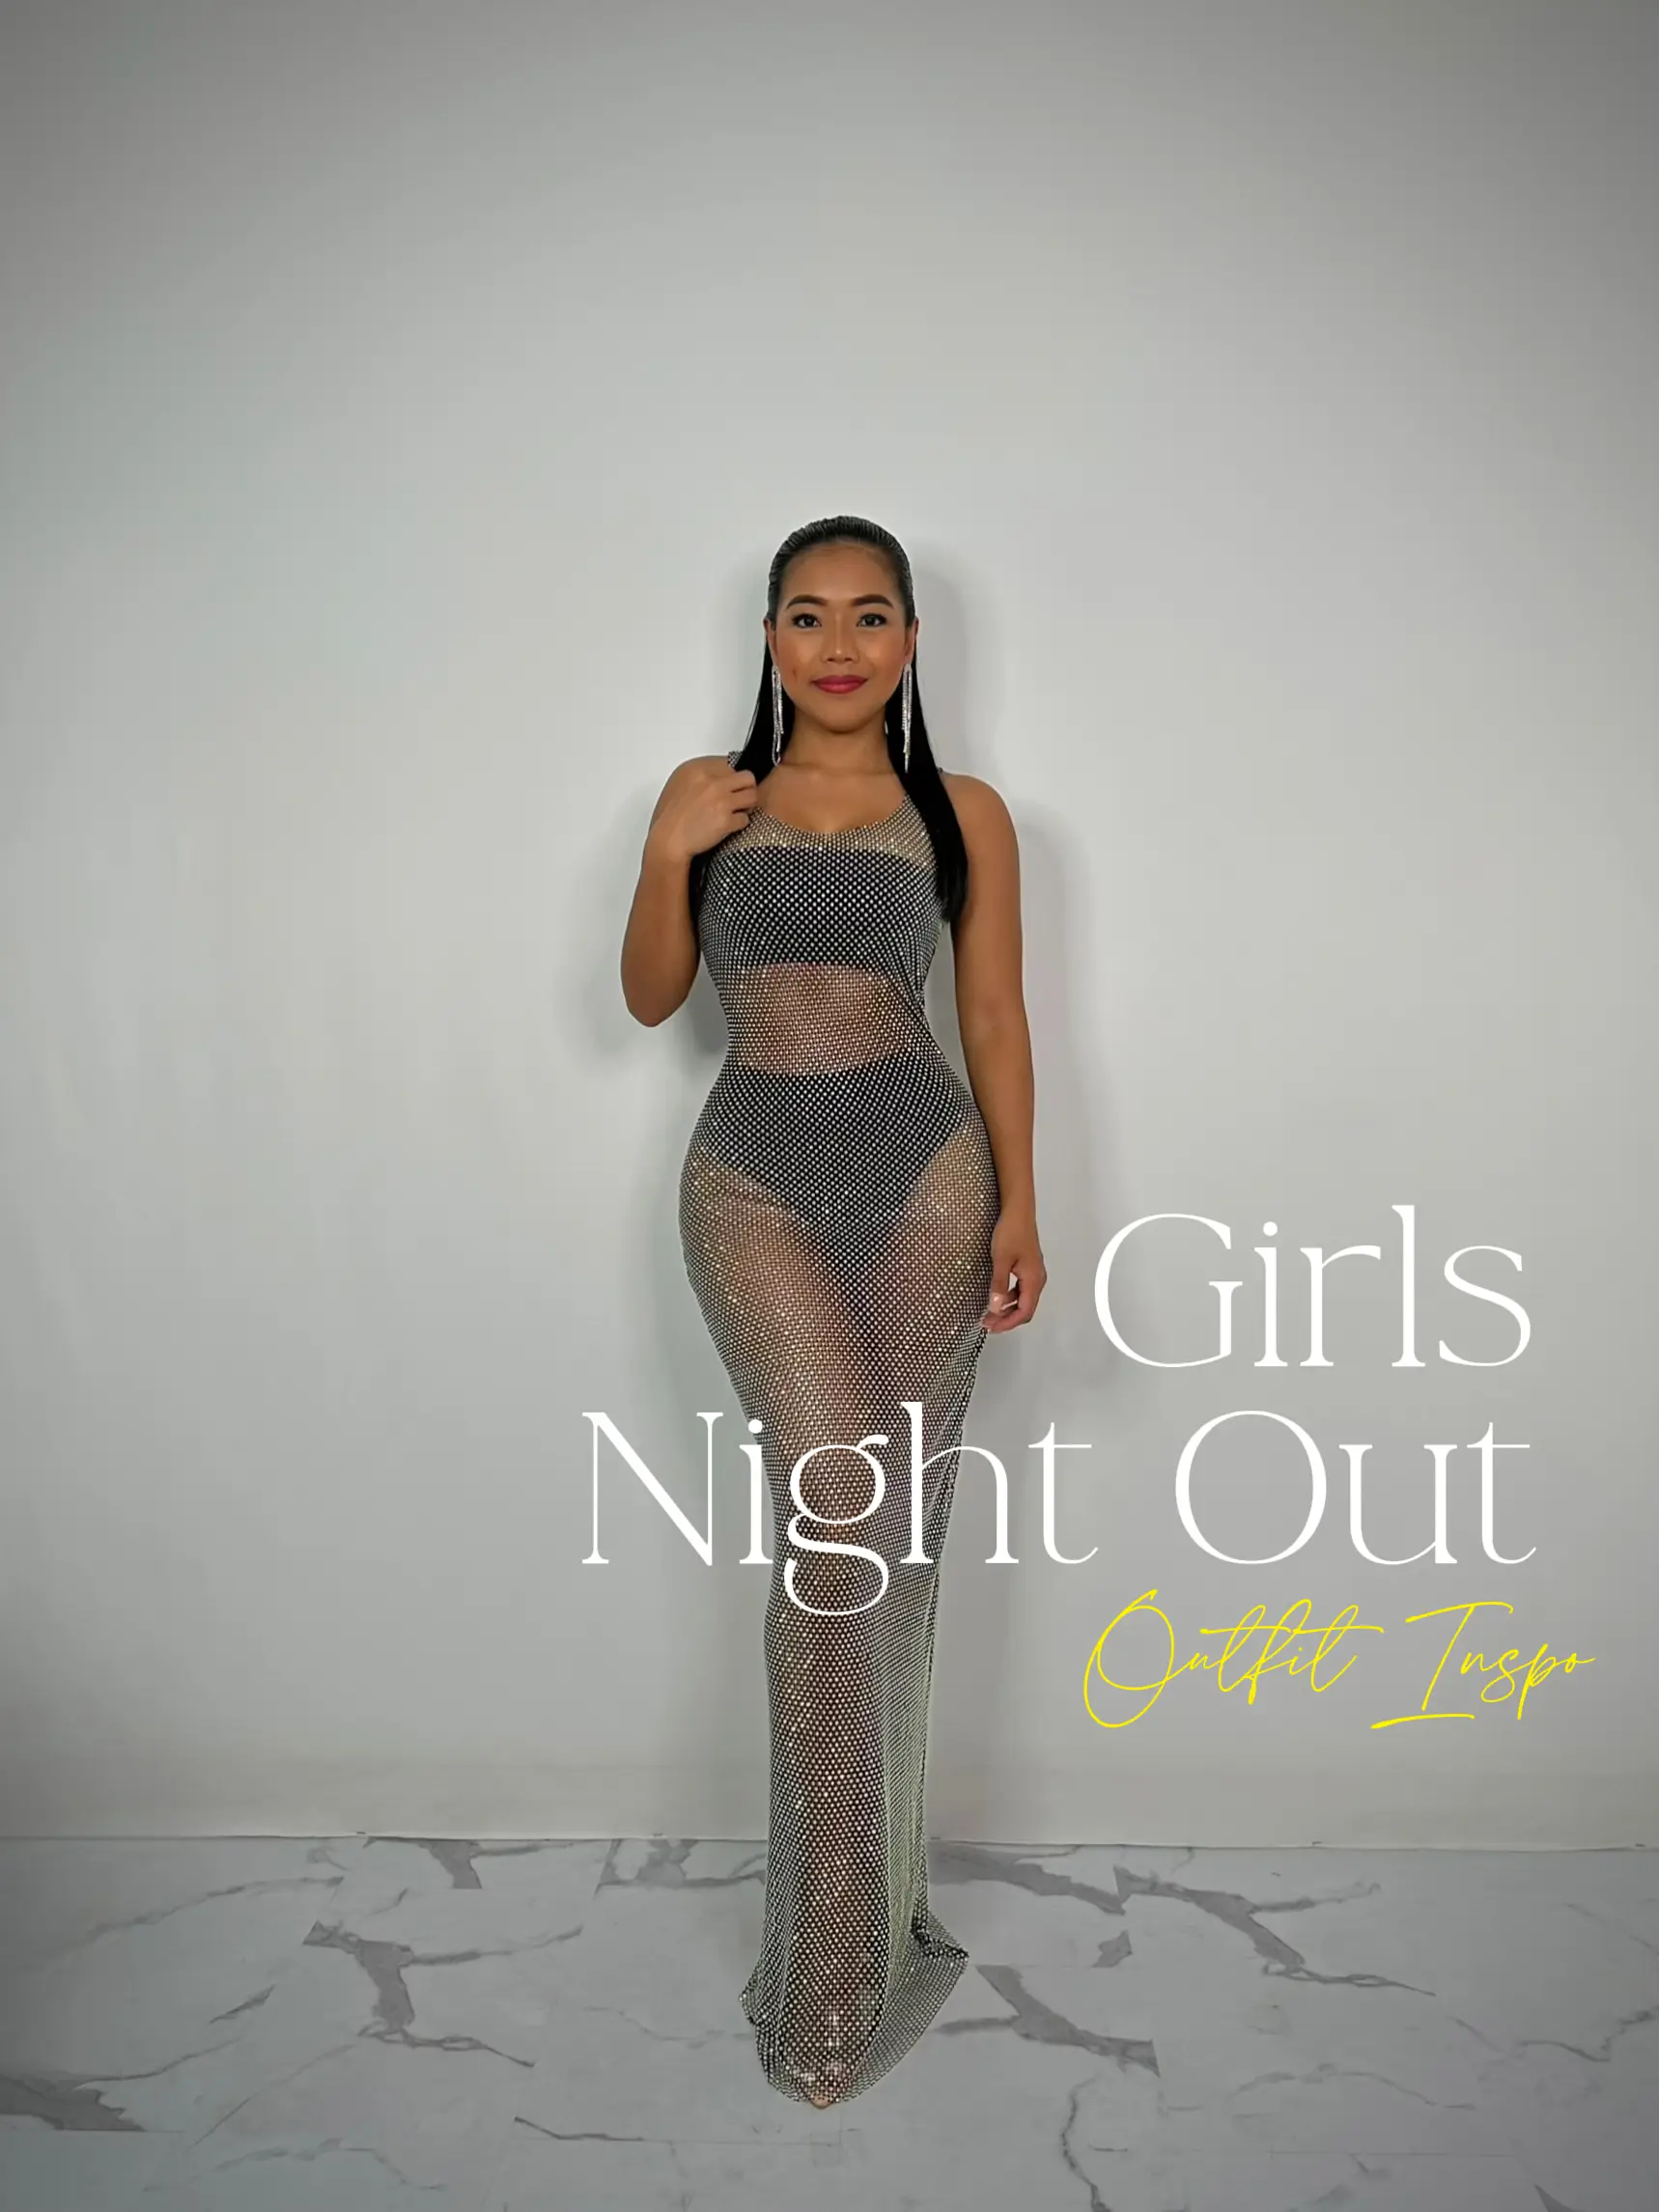 Girls Night Out Outfit Inspo✨, Video published by Gemma